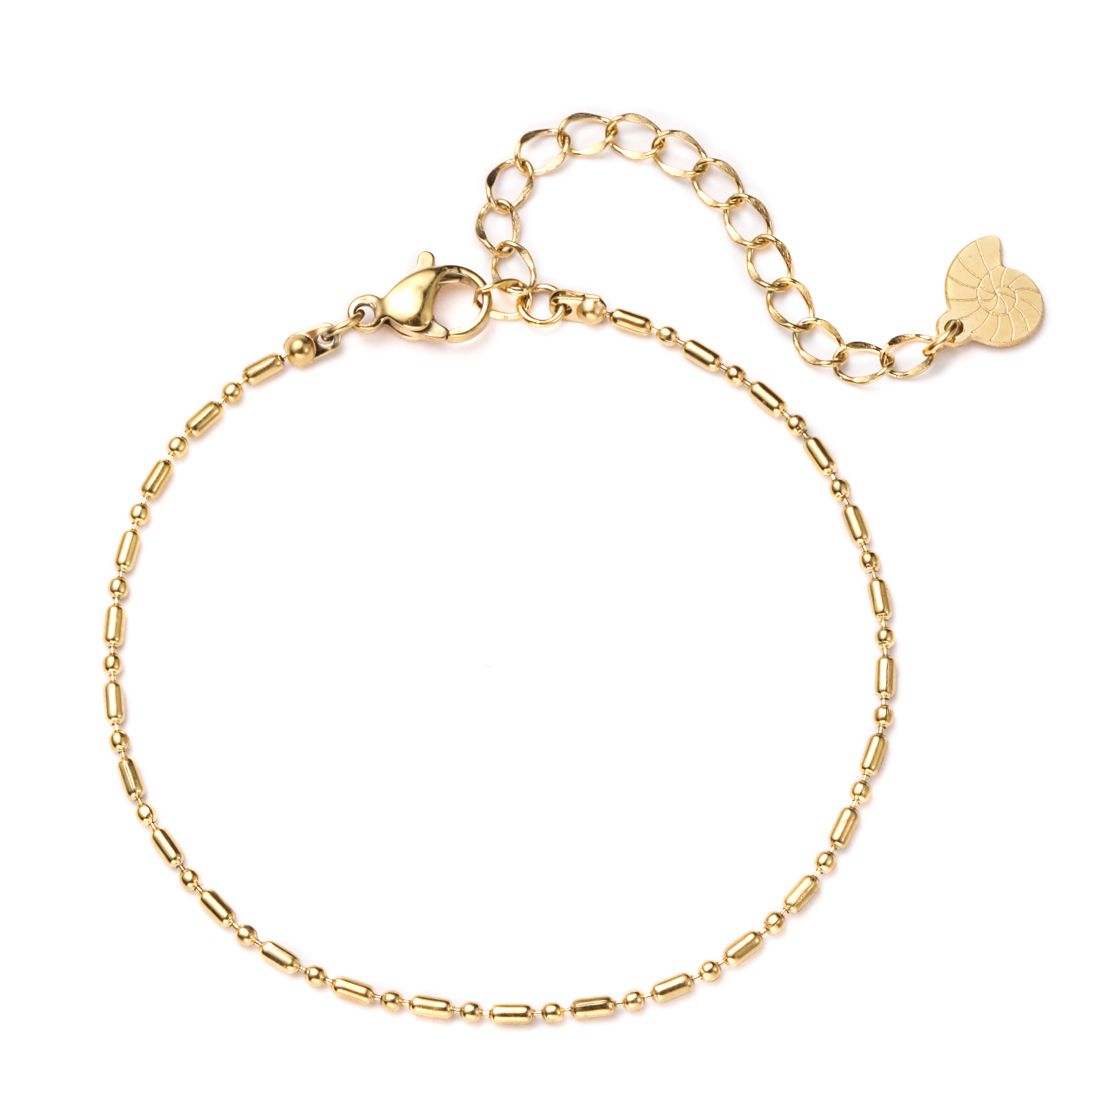 Bead and Bar Chain Bracelet Gold